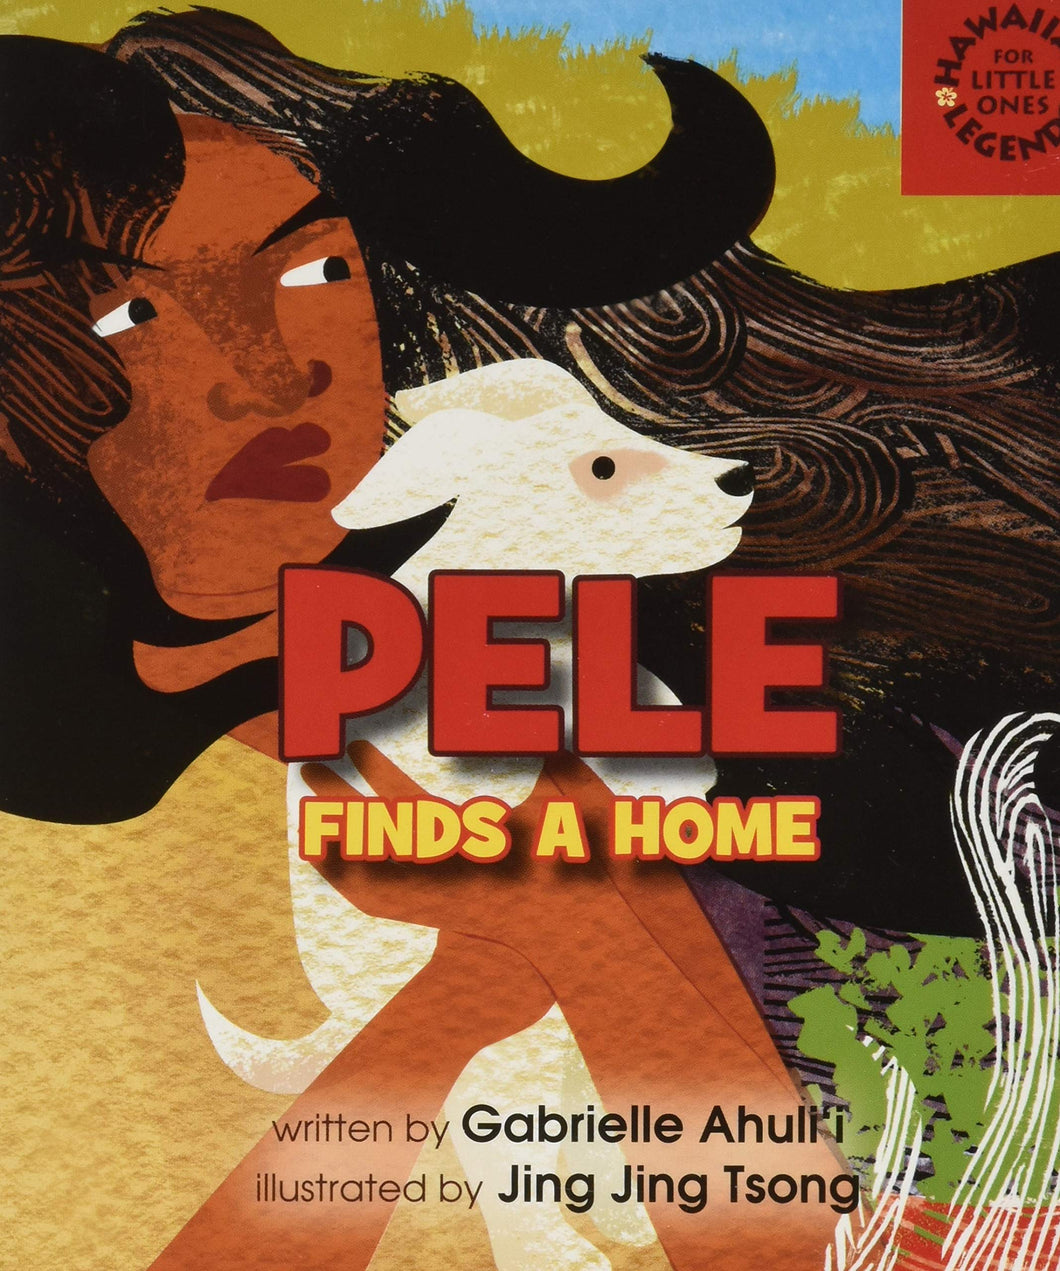 Pele Finds A Home (Hawaiian Legends: for Little Ones) Board Book by Gabrielle Ahulii